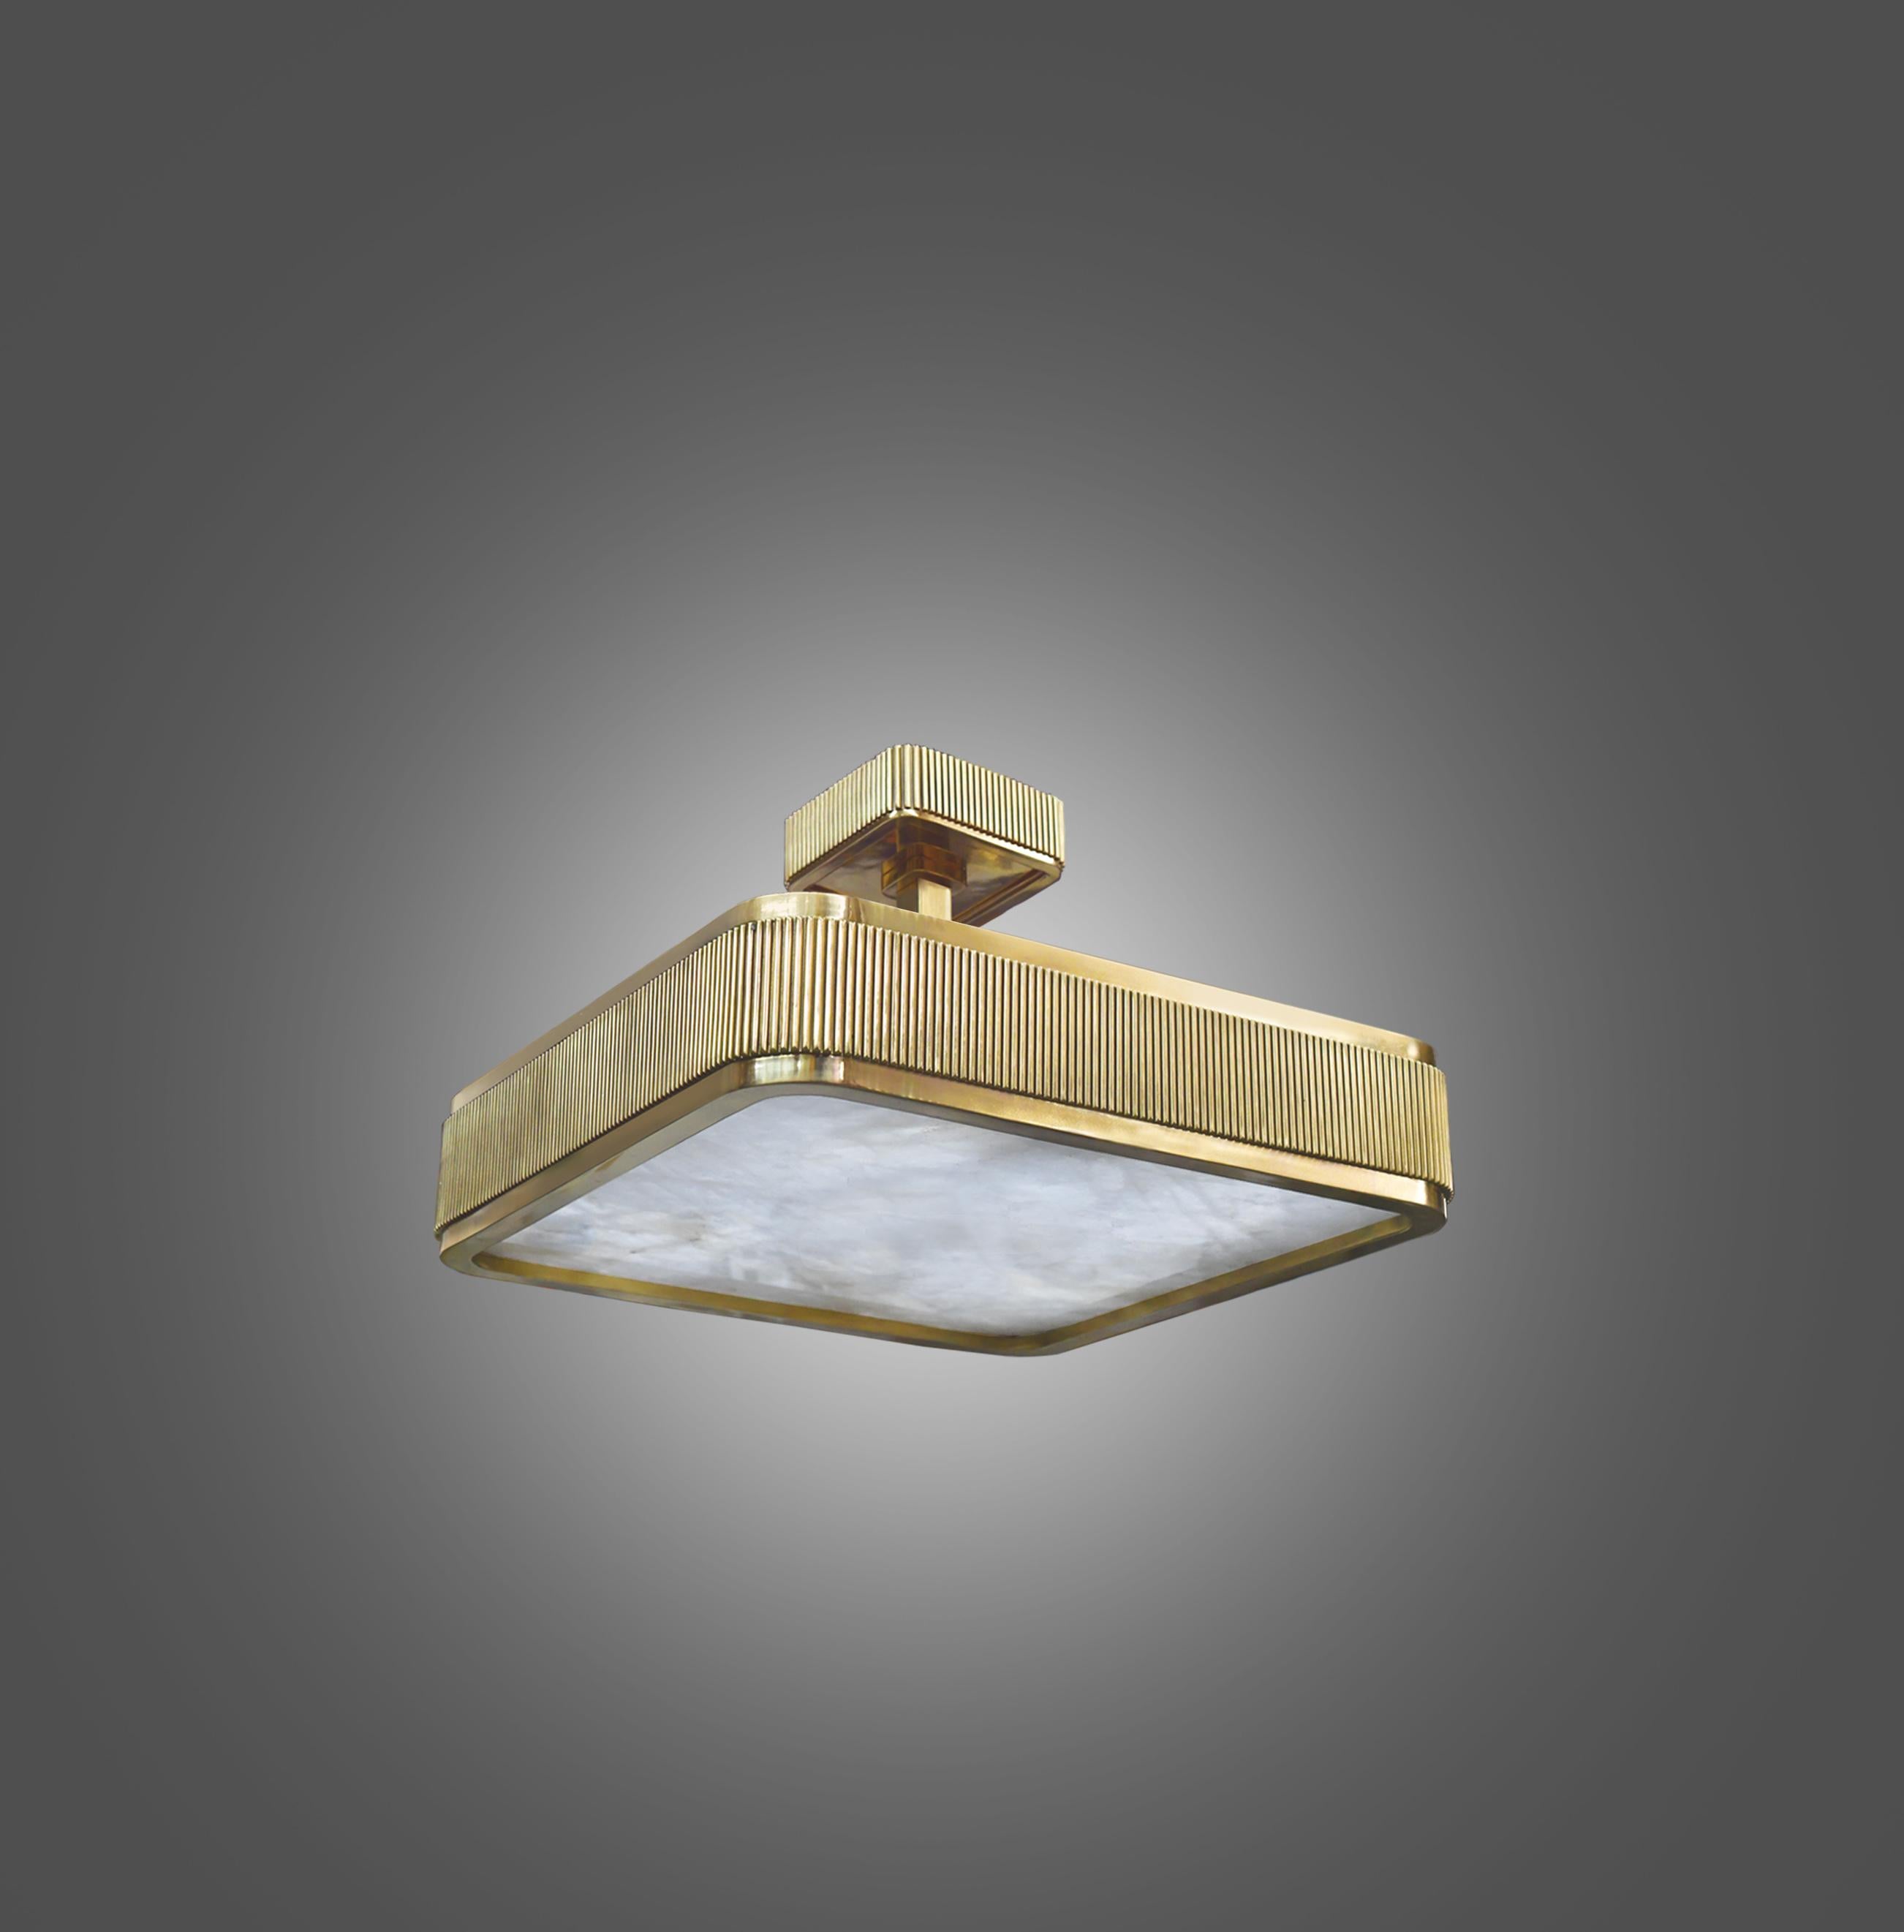 Elegant form polished brass frame with rock crystal panel, BSO rock crystal semi flushmount created by Phoenix, NYC.
Height can be adjustable.